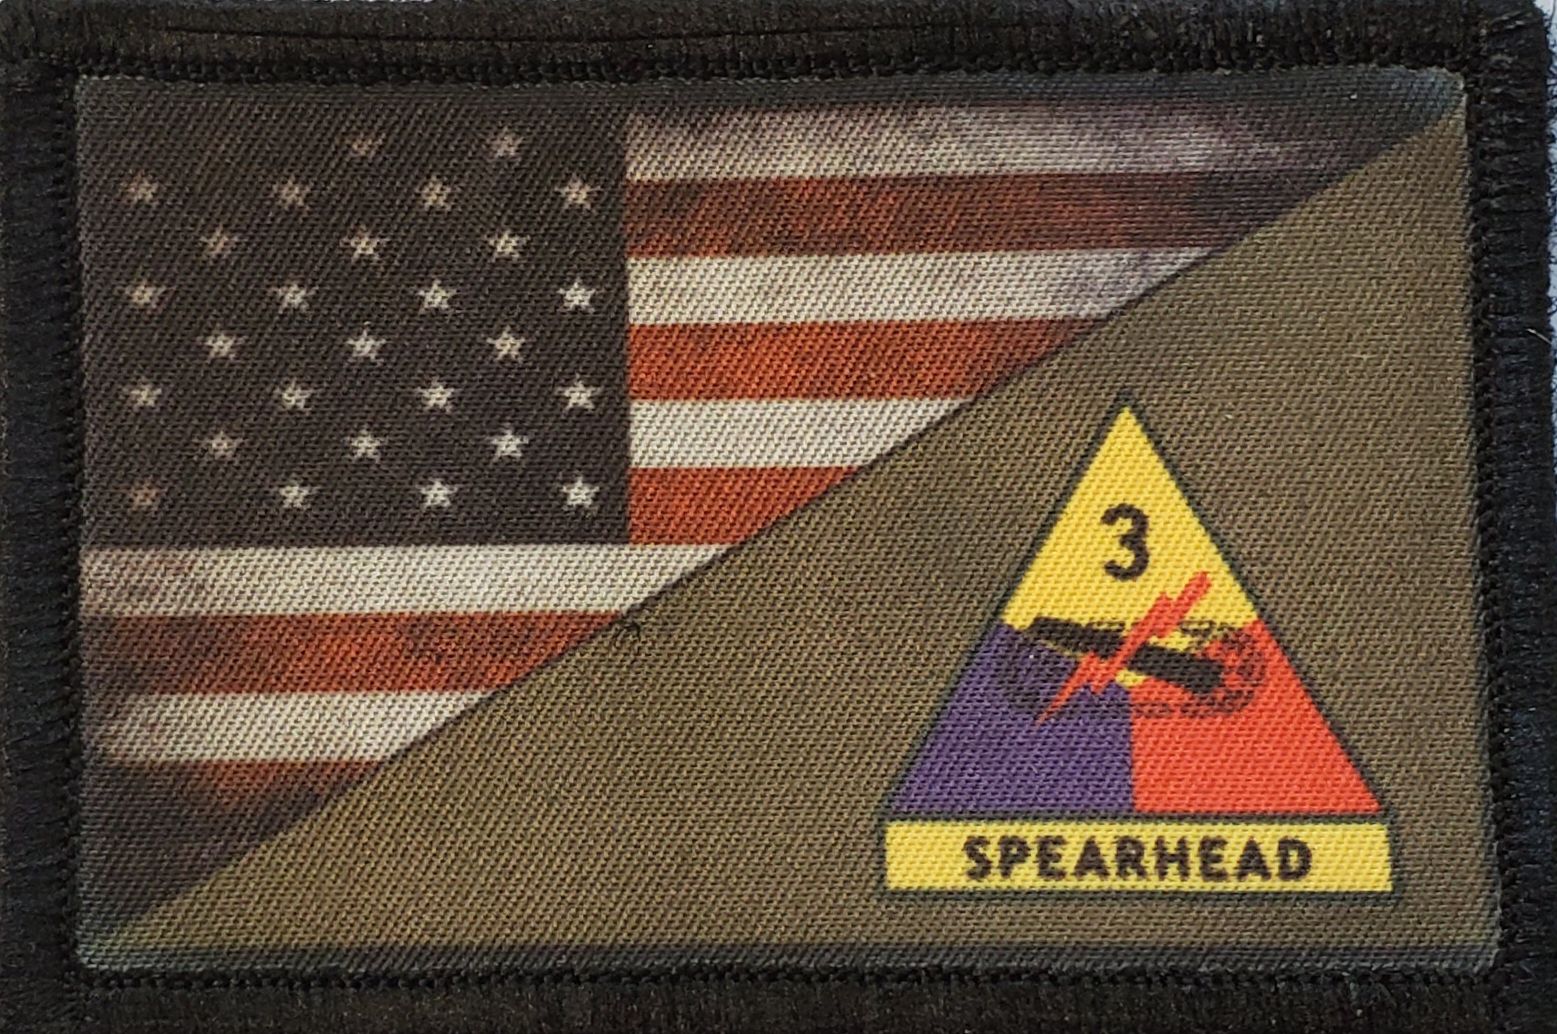 3rd Armored Division Spearhead Velcro Morale Patch